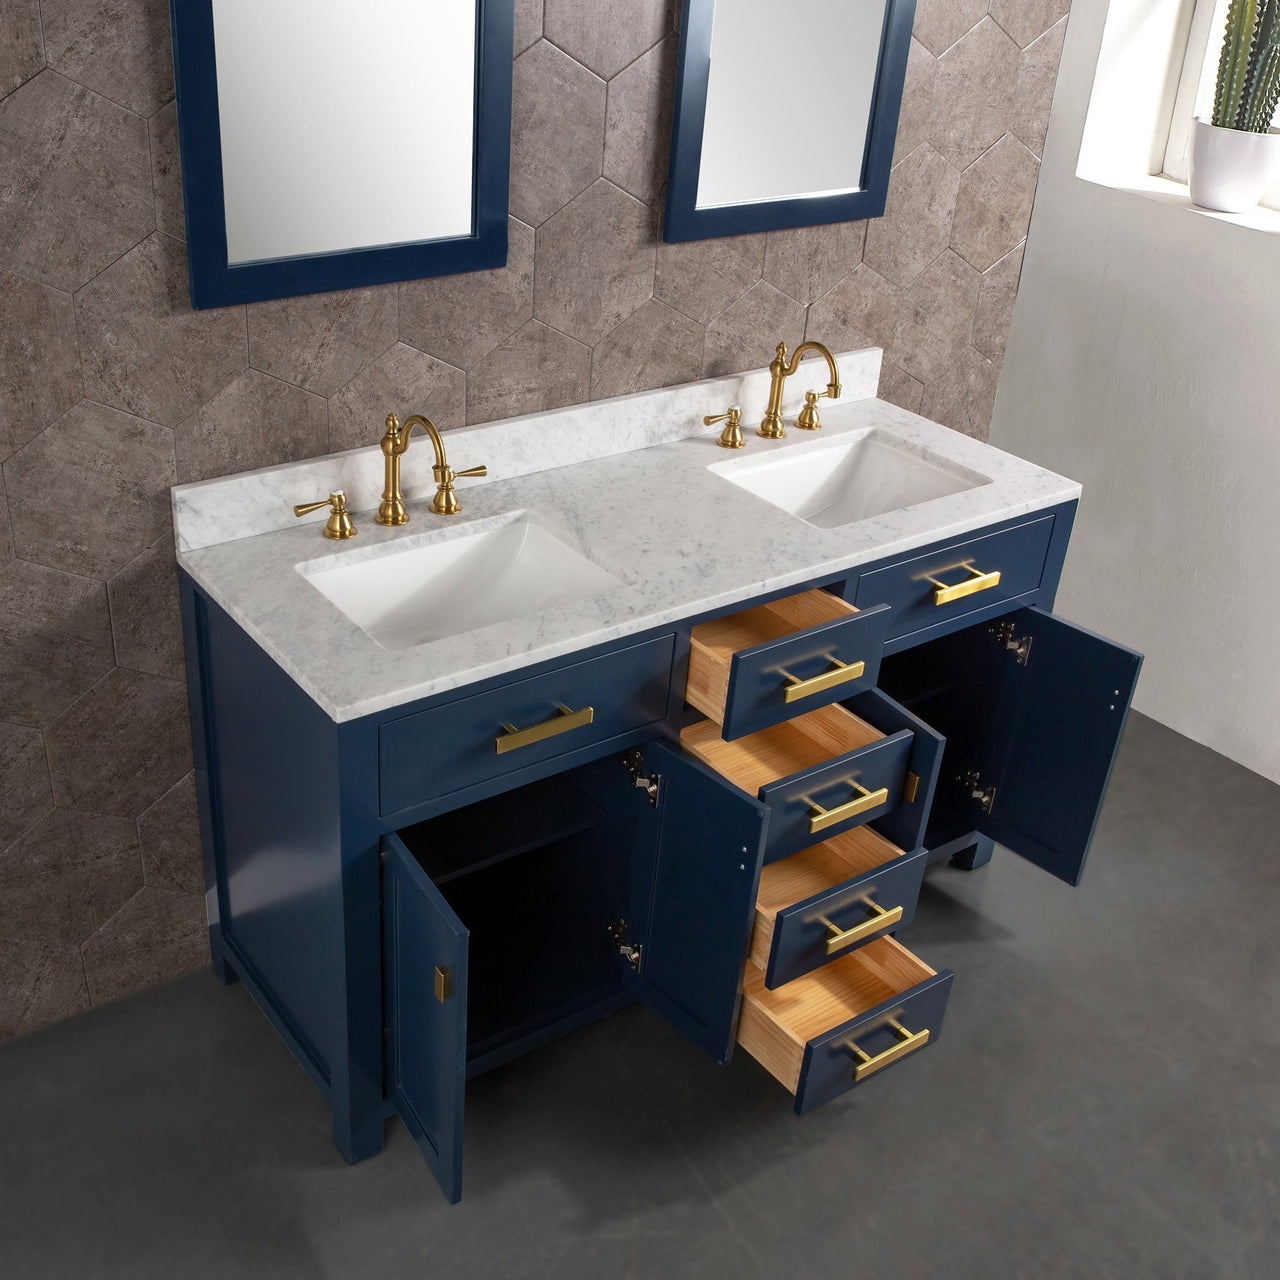 Madison 60-Inch Double Sink Carrara White Marble Vanity In Monarch BlueWith Matching Mirror(s) and F2-0012-06-TL Lavatory Faucet(s) Vanity Water Creation 